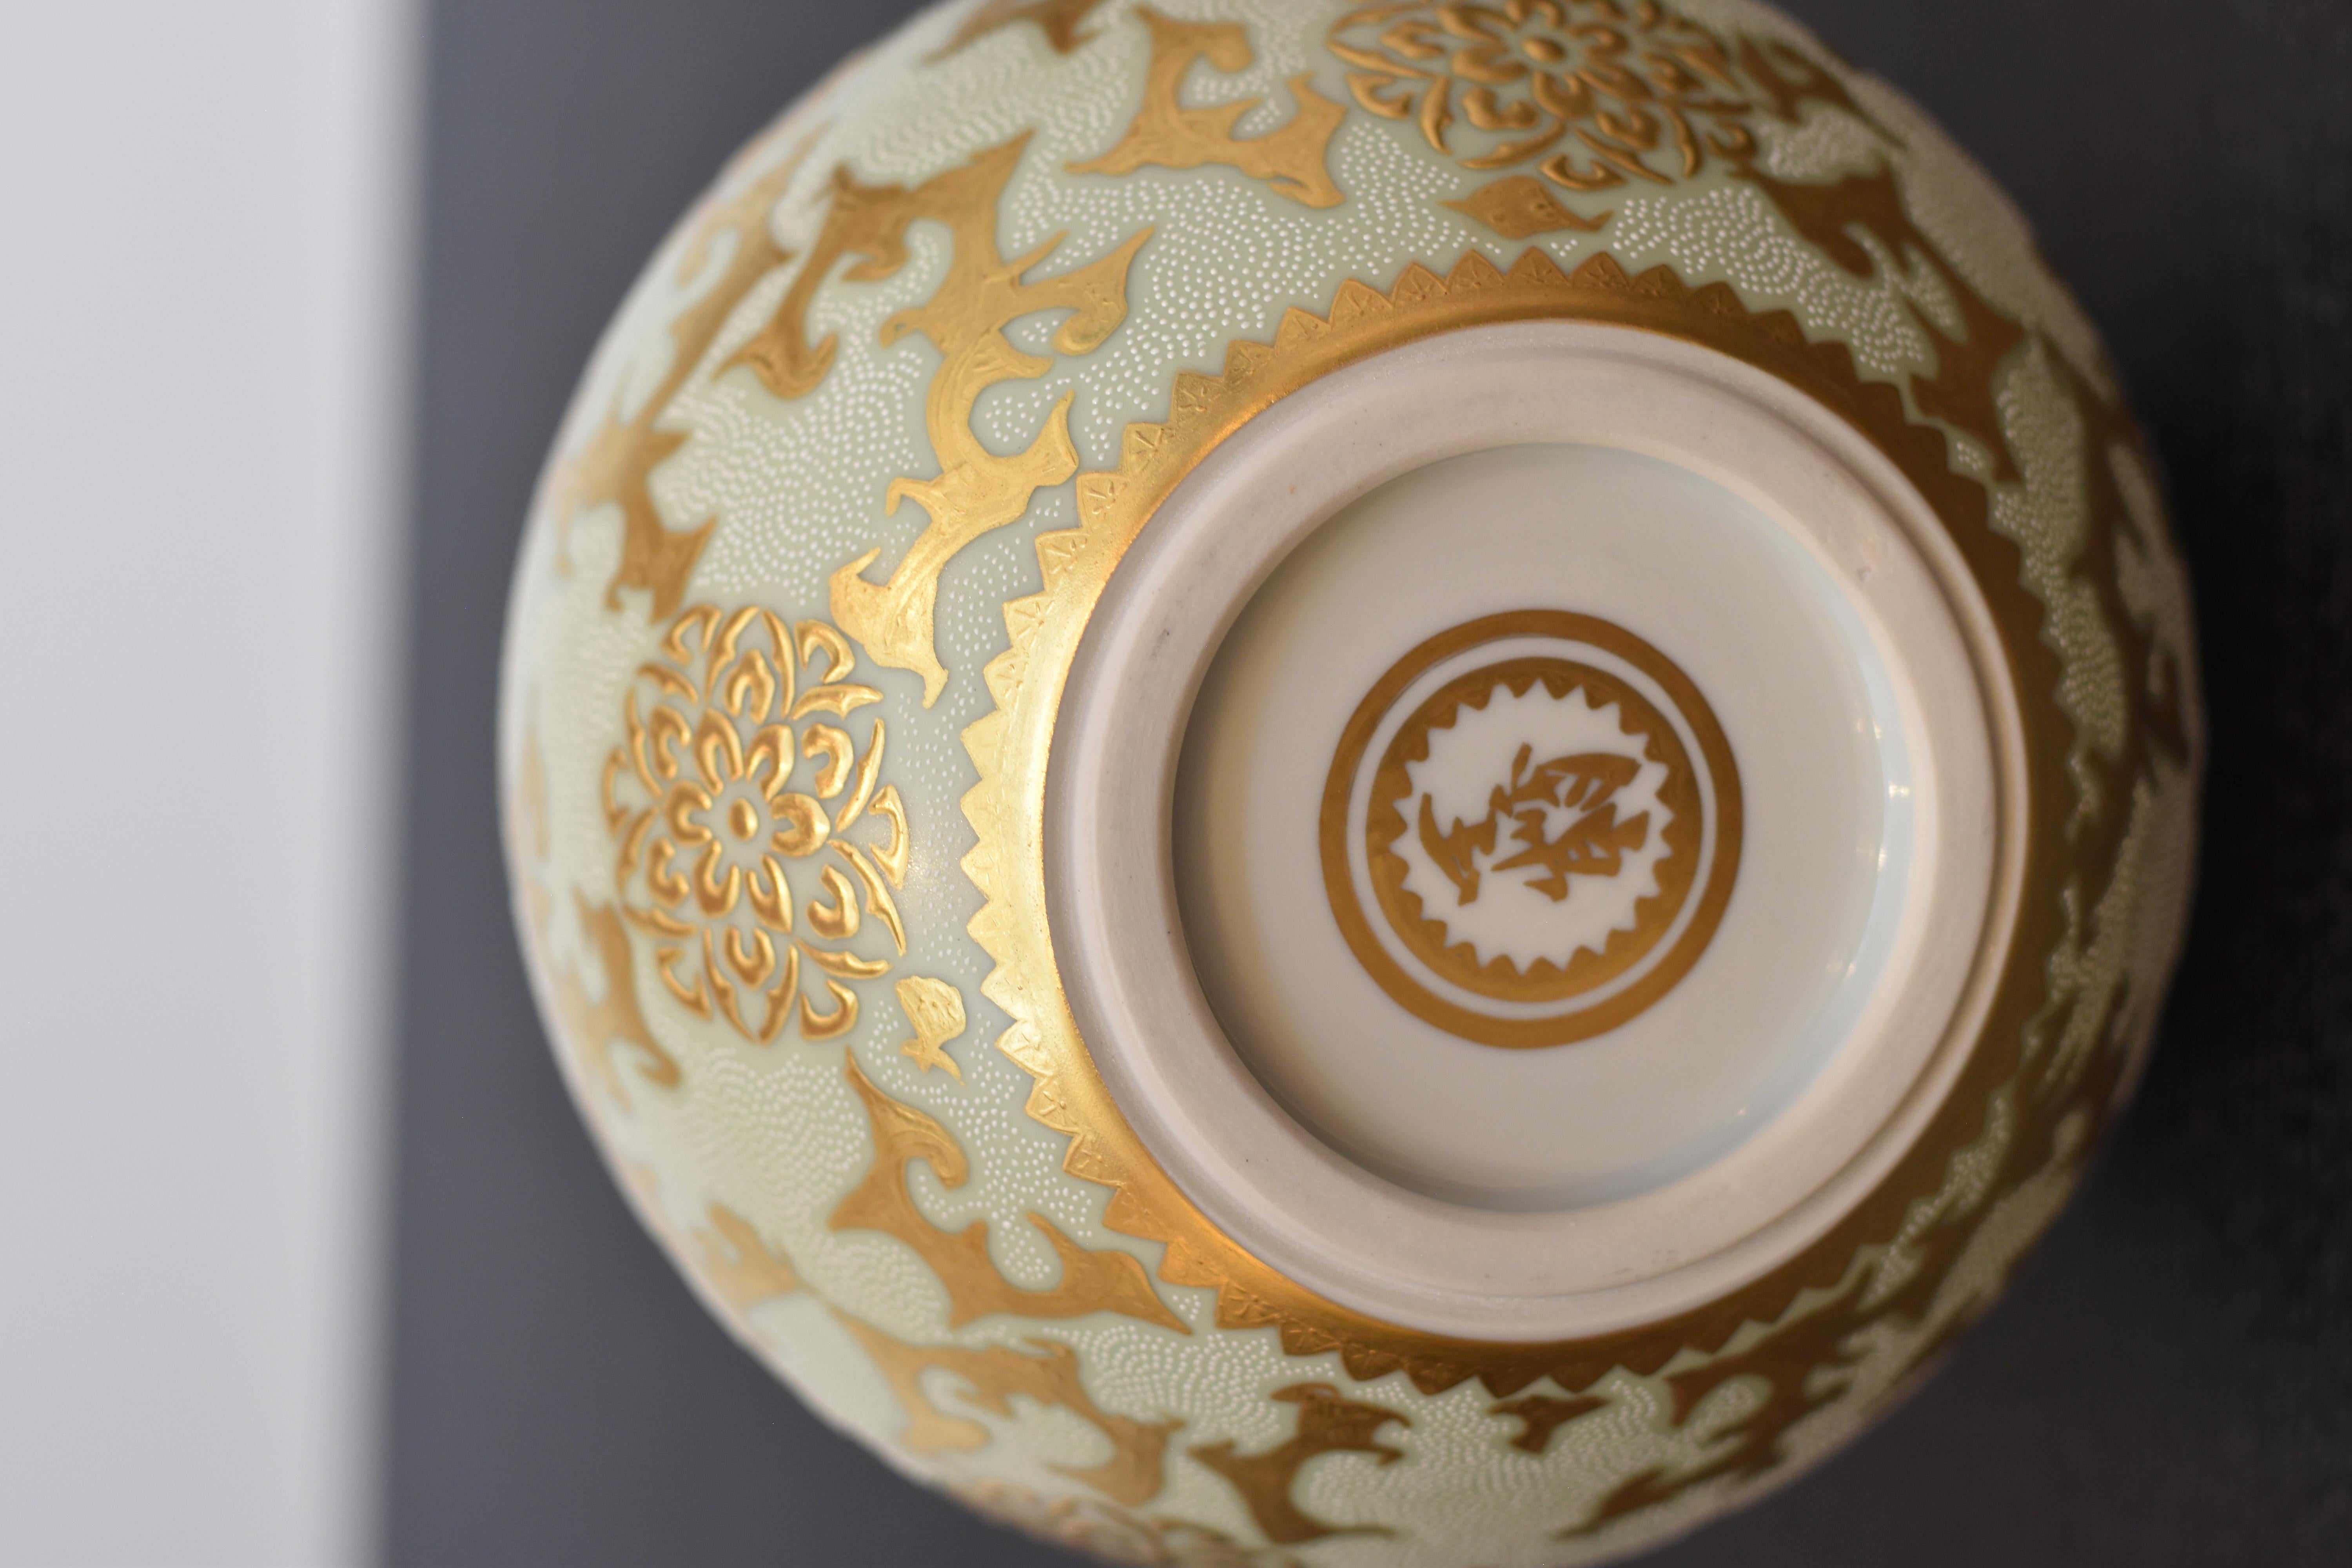  Japanese Contemporary  White Pure Gold Porcelain Vase by Master Artist, 3 In New Condition For Sale In Takarazuka, JP